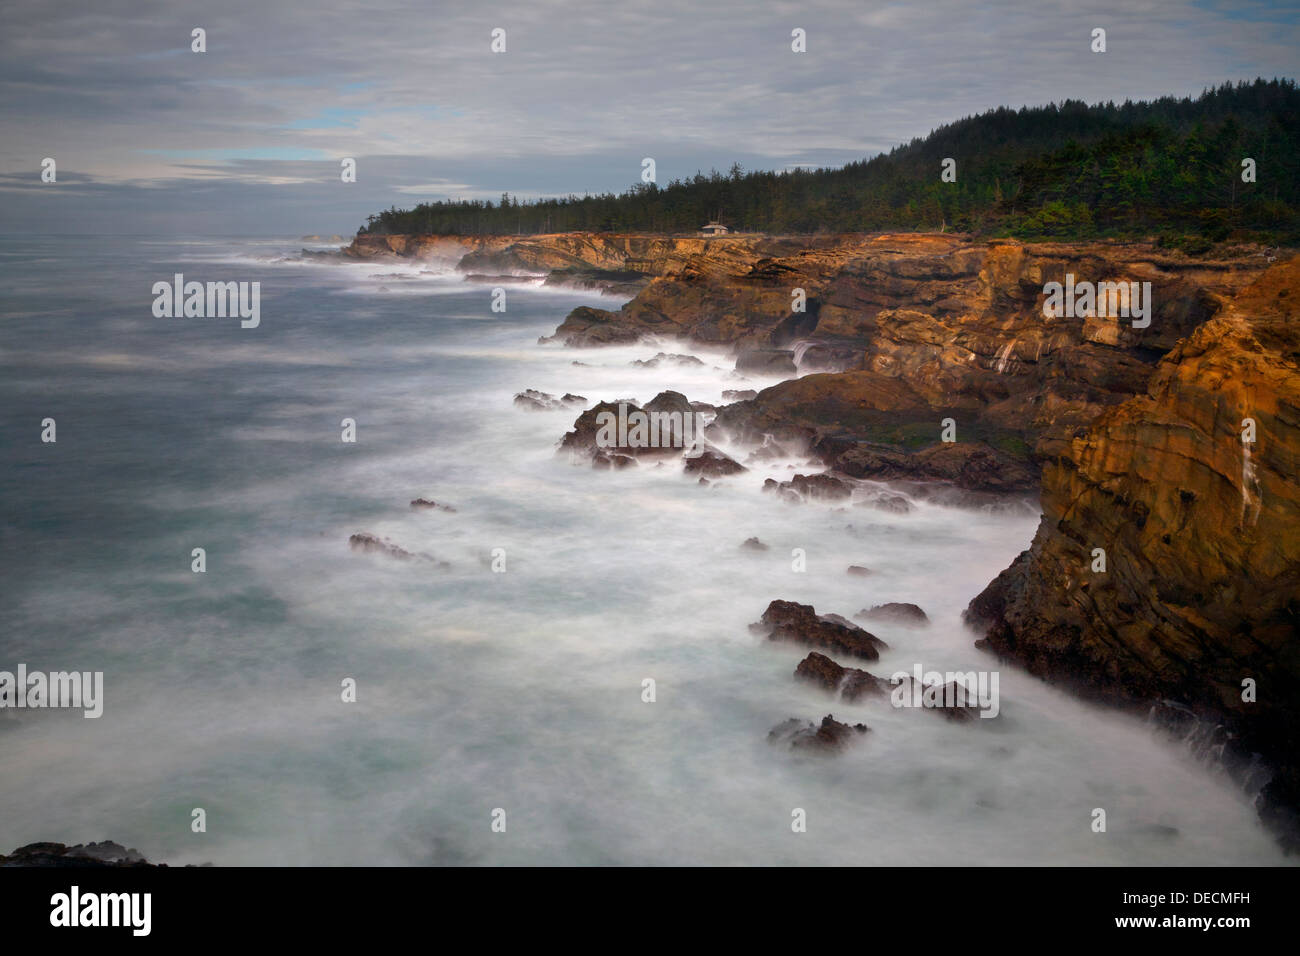 OREGON - Rough surf pounding against the weathered sandstone cliffs at Shore Acres State Park. Stock Photo